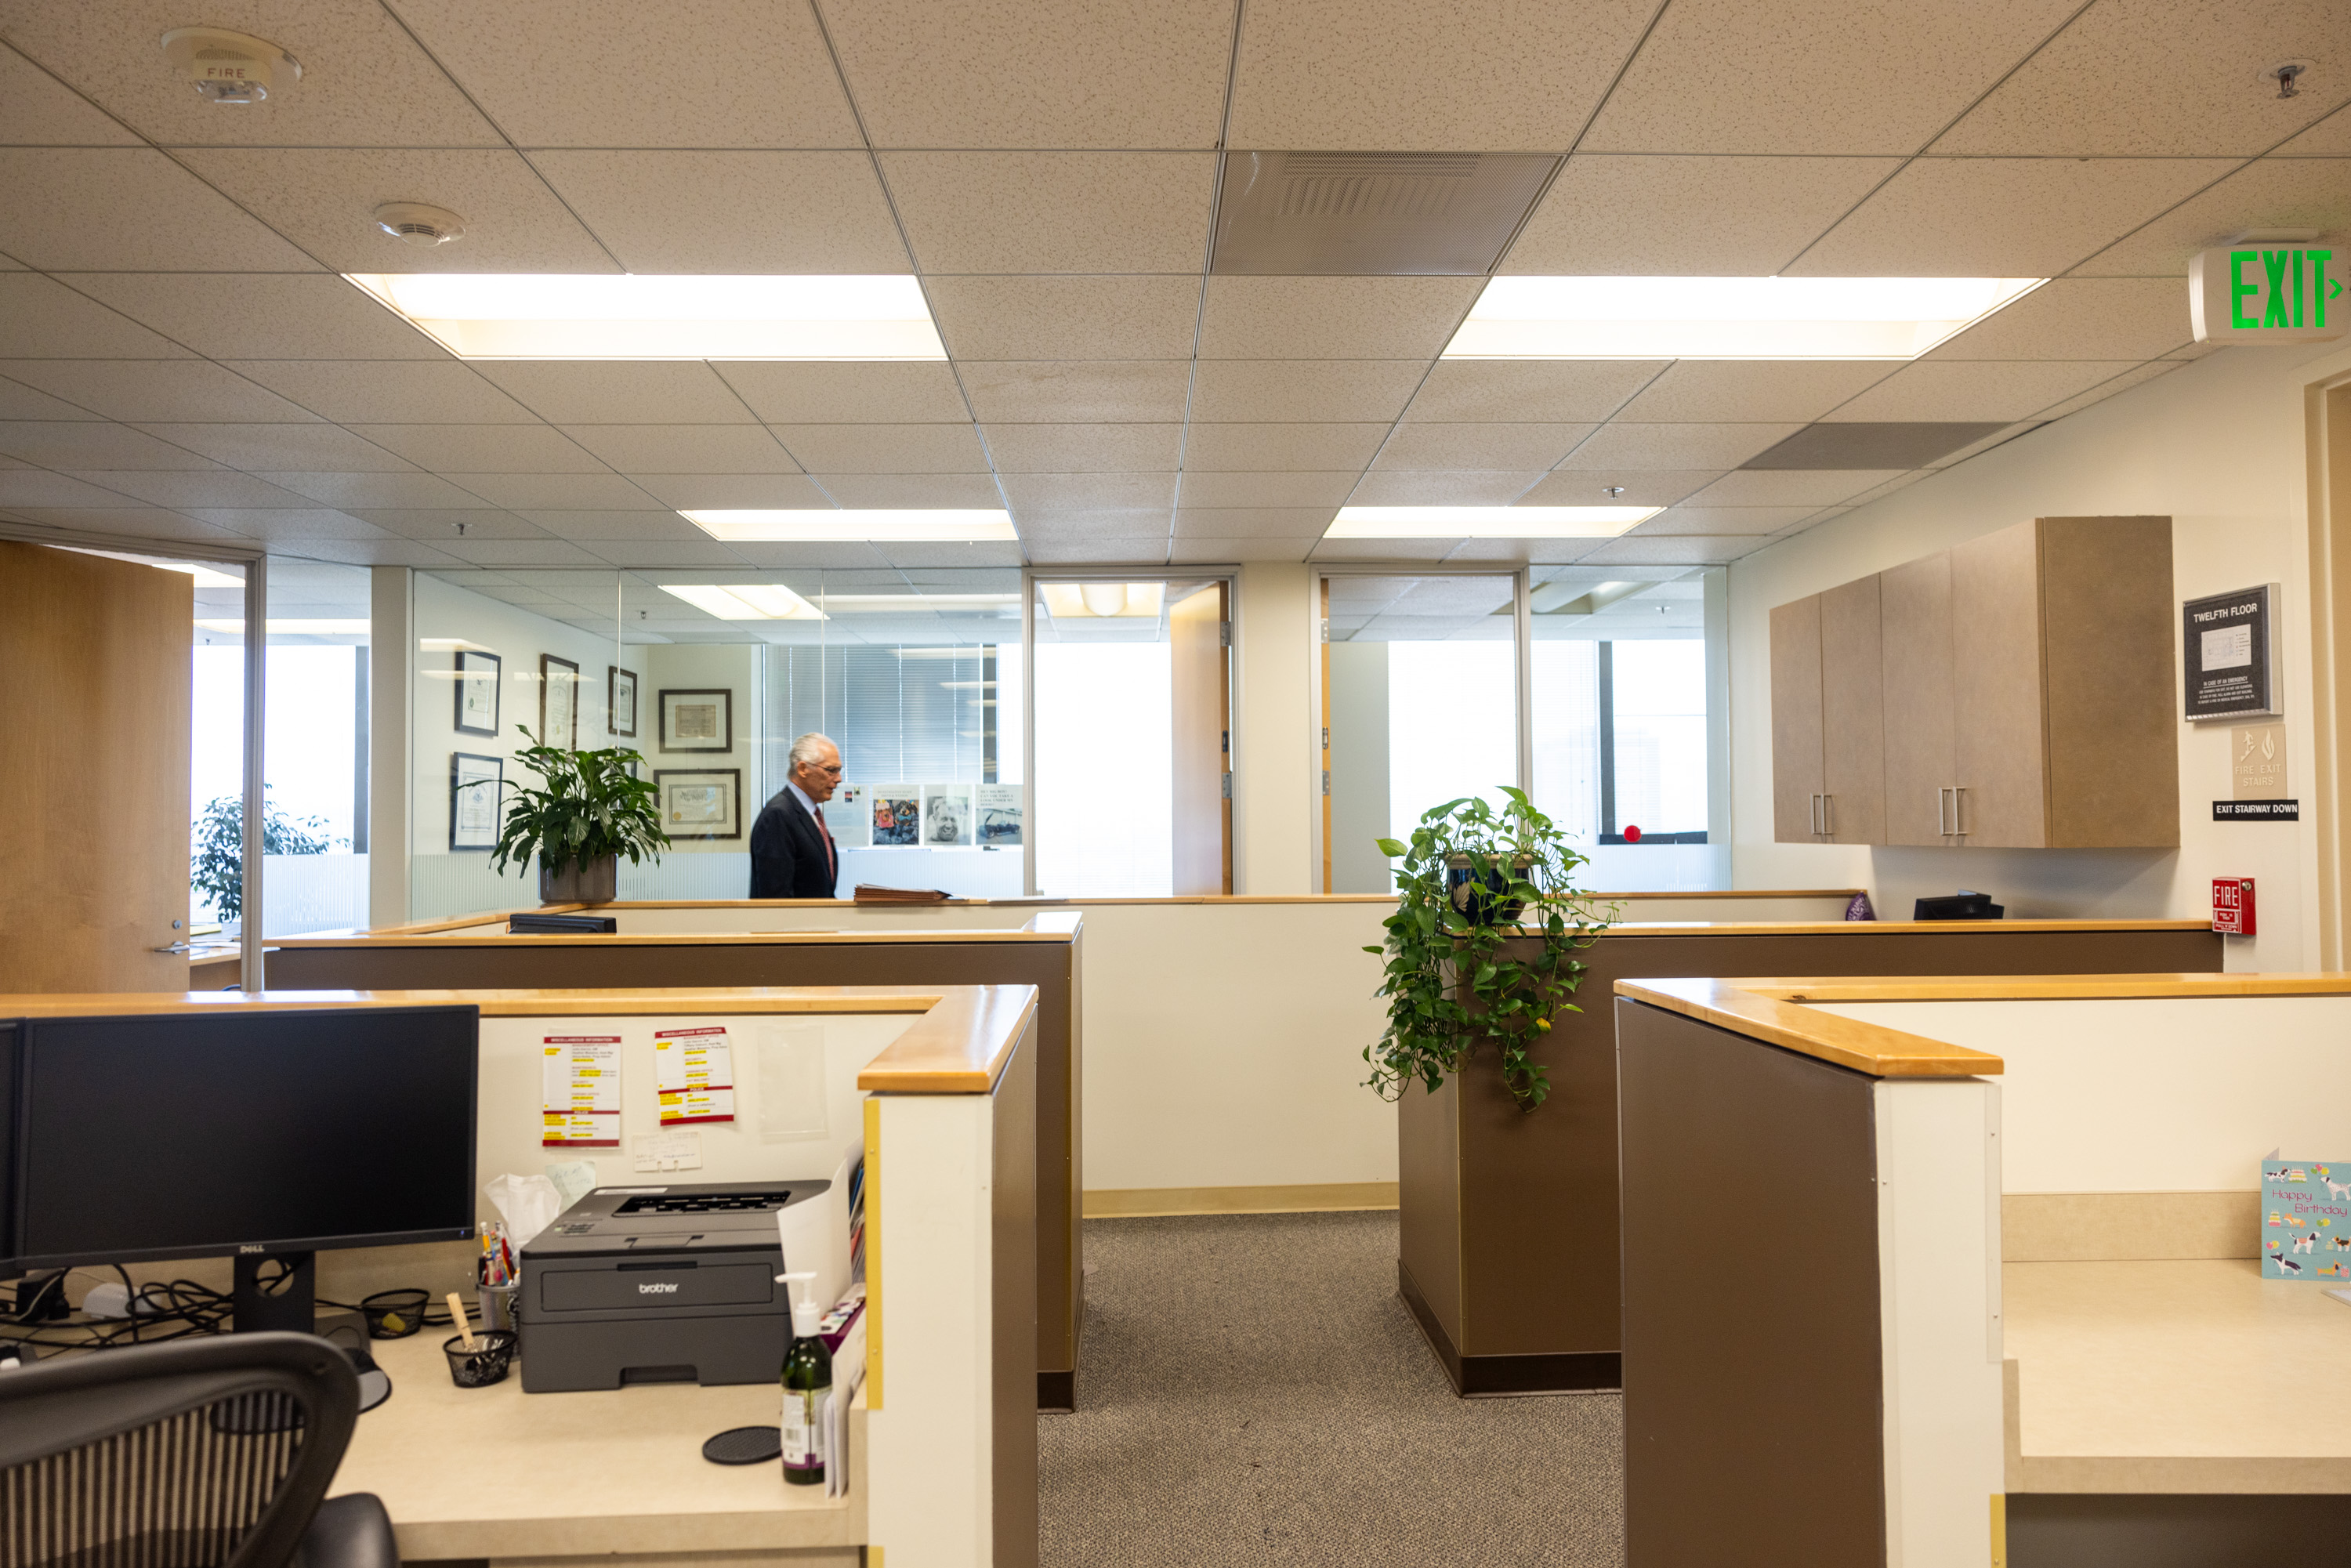 The image shows a tidy office with cubicles, plants, framed pictures, and a man walking. There's an EXIT sign above a door, and office equipment/desk supplies are visible.